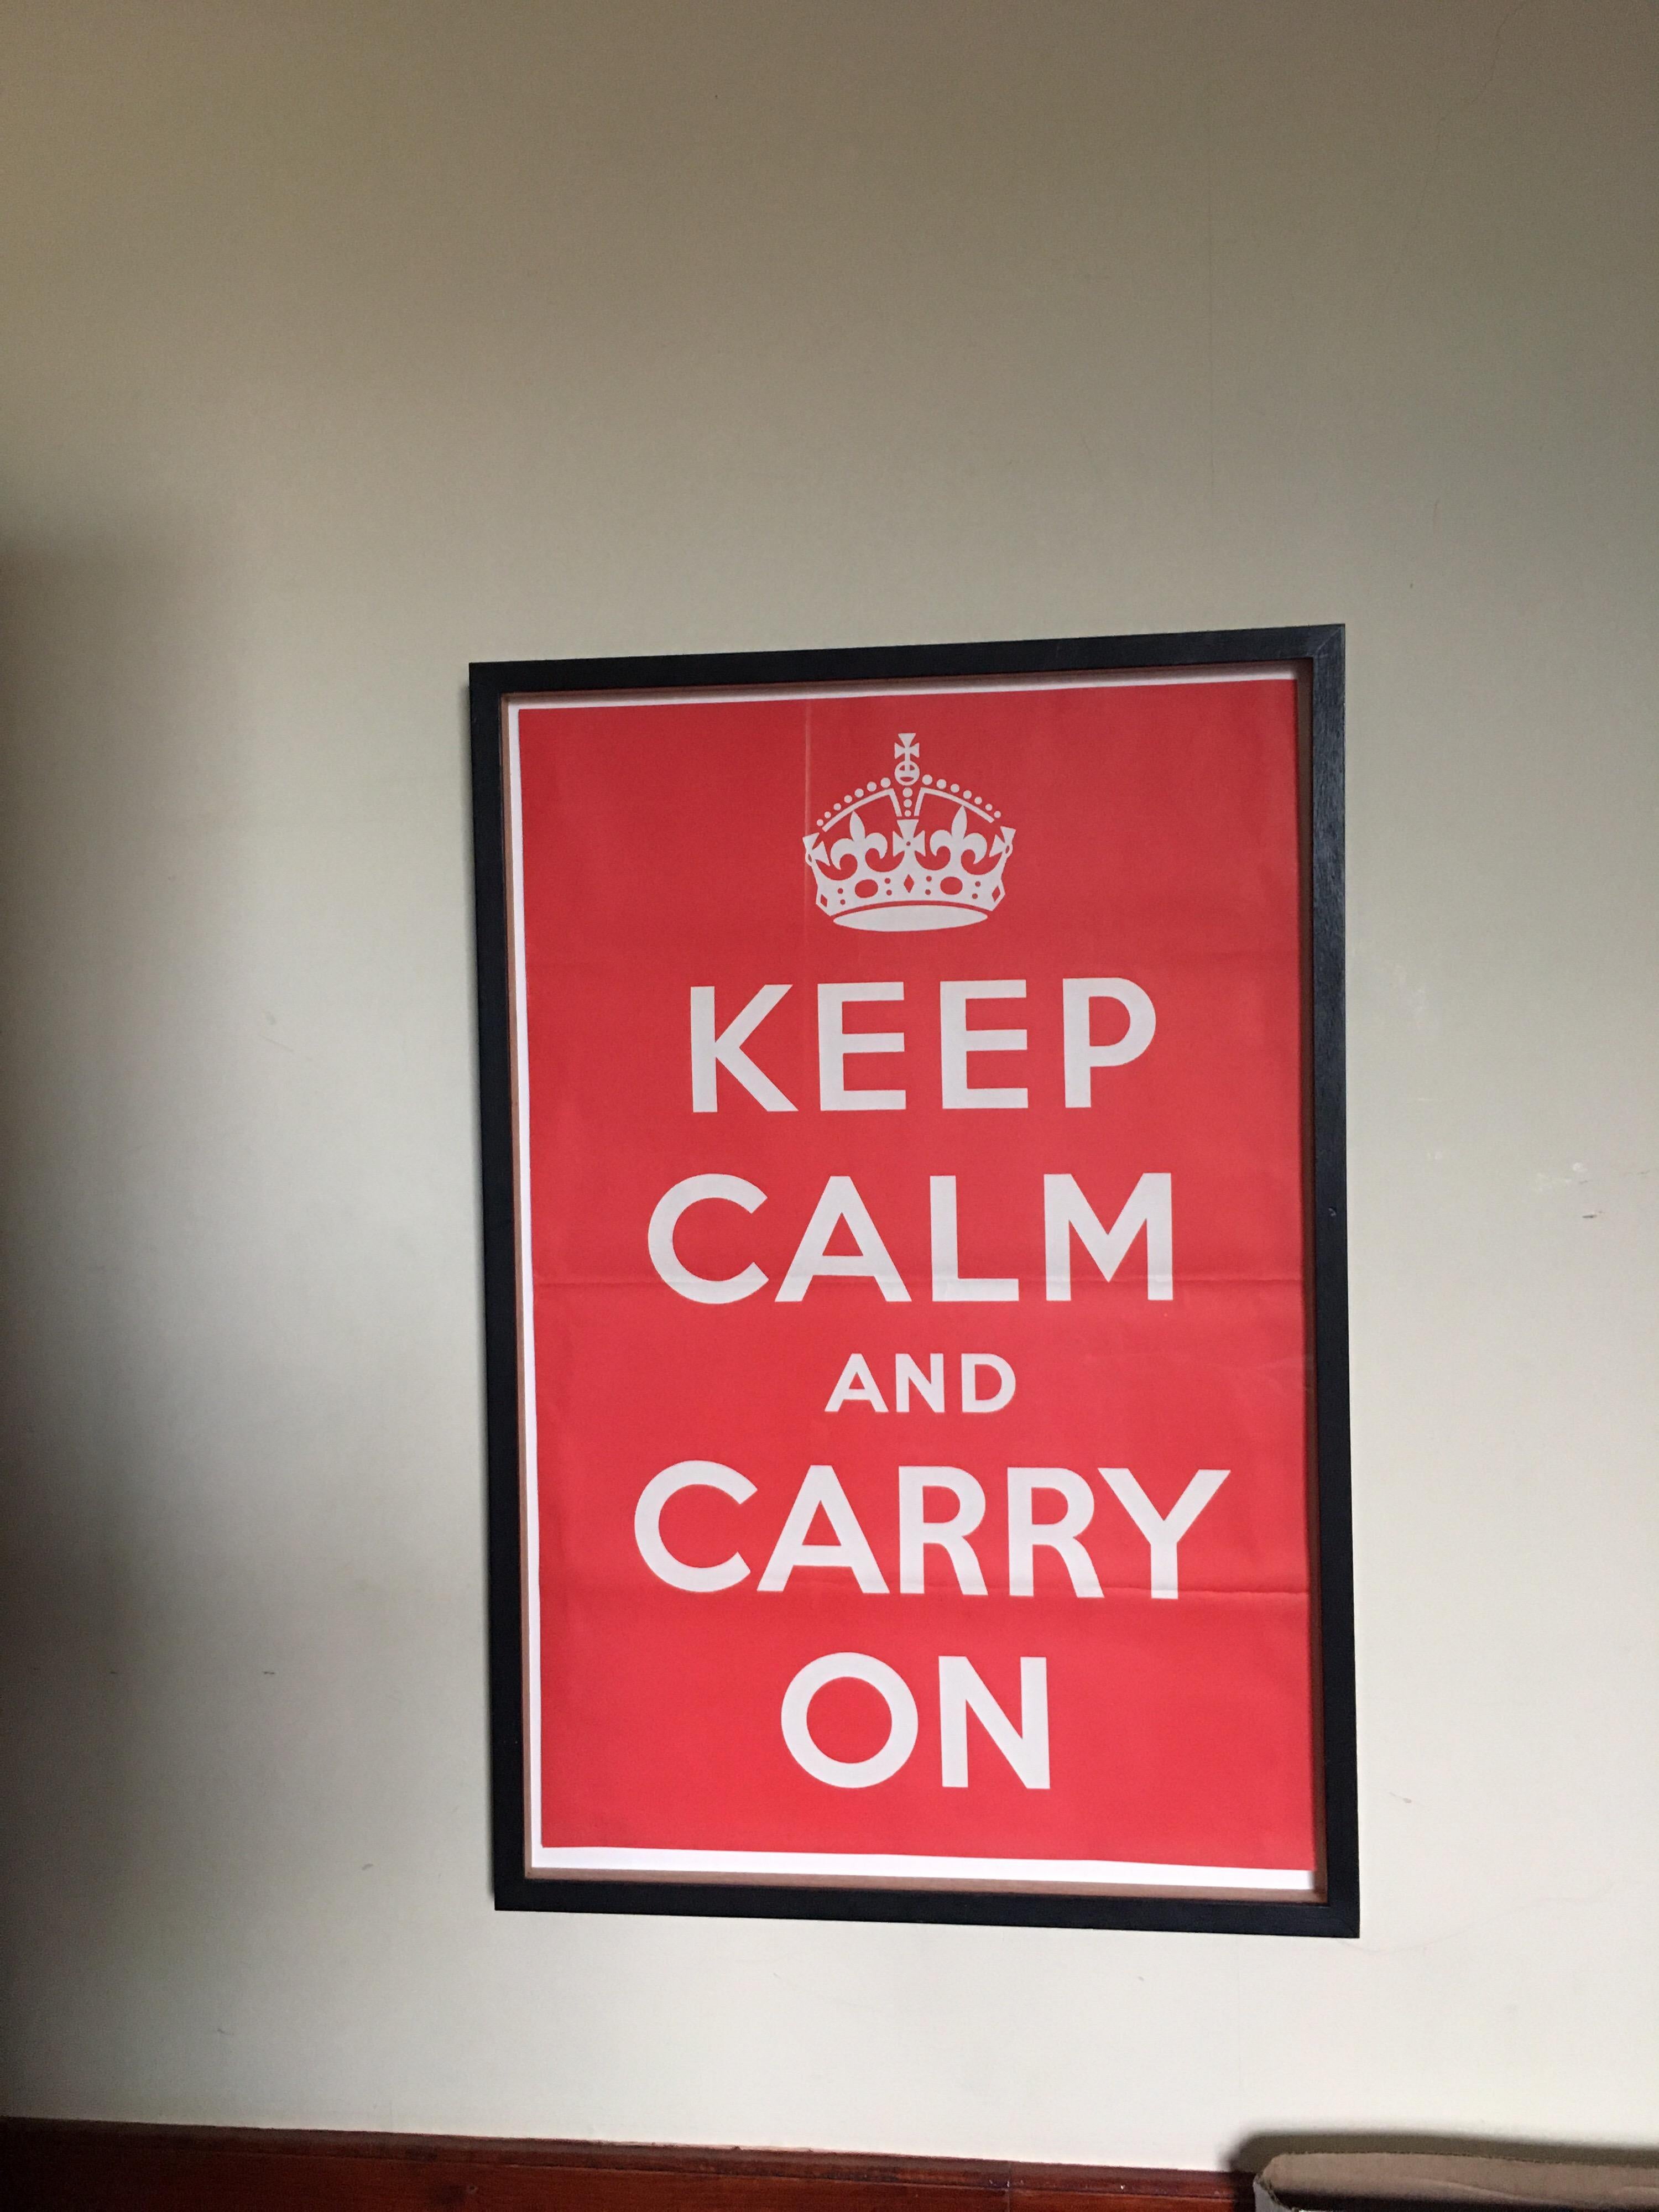 1939 Original Keep Calm and Carry On Poster - Print by Unknown